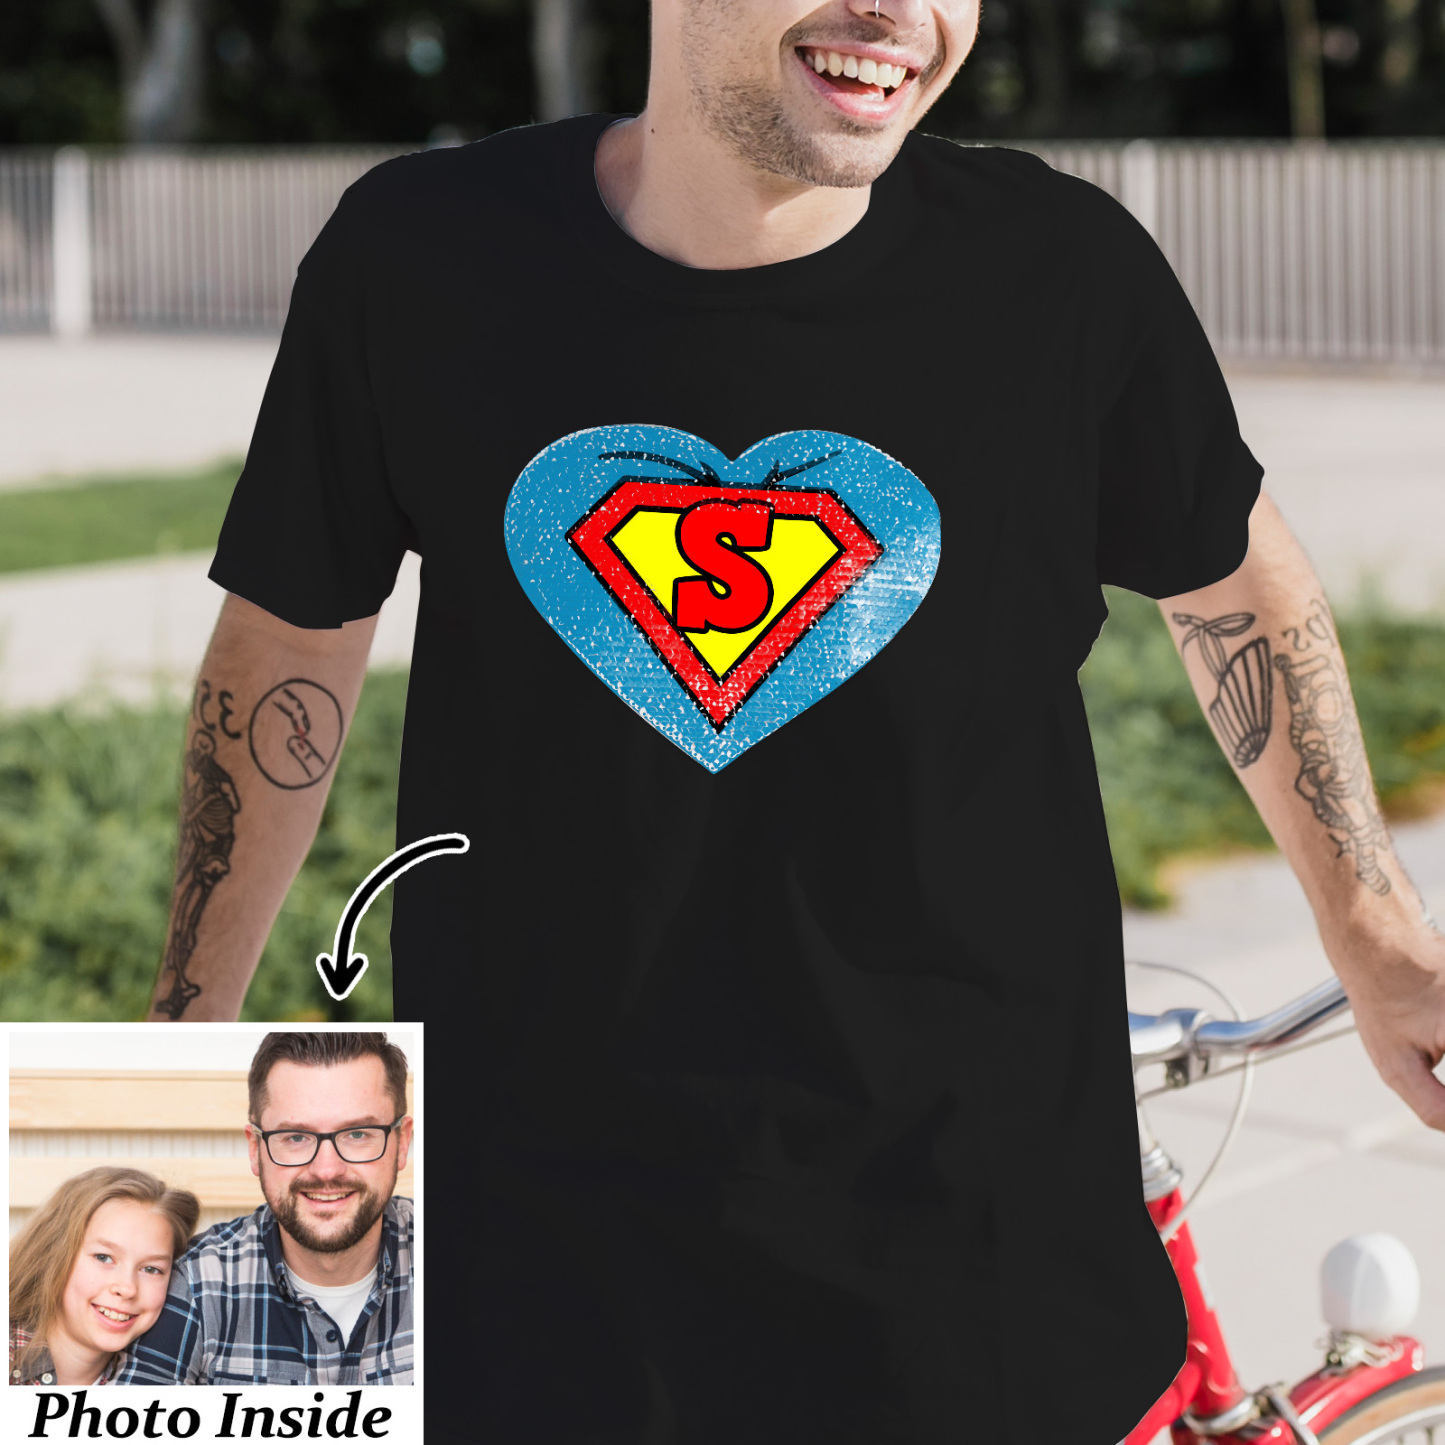 Custom Photo Heart Flip Double Sided Sequin T-shirt Personalized Picture Sequin Tee Father's Day Gifts Super Dad - soufeelau